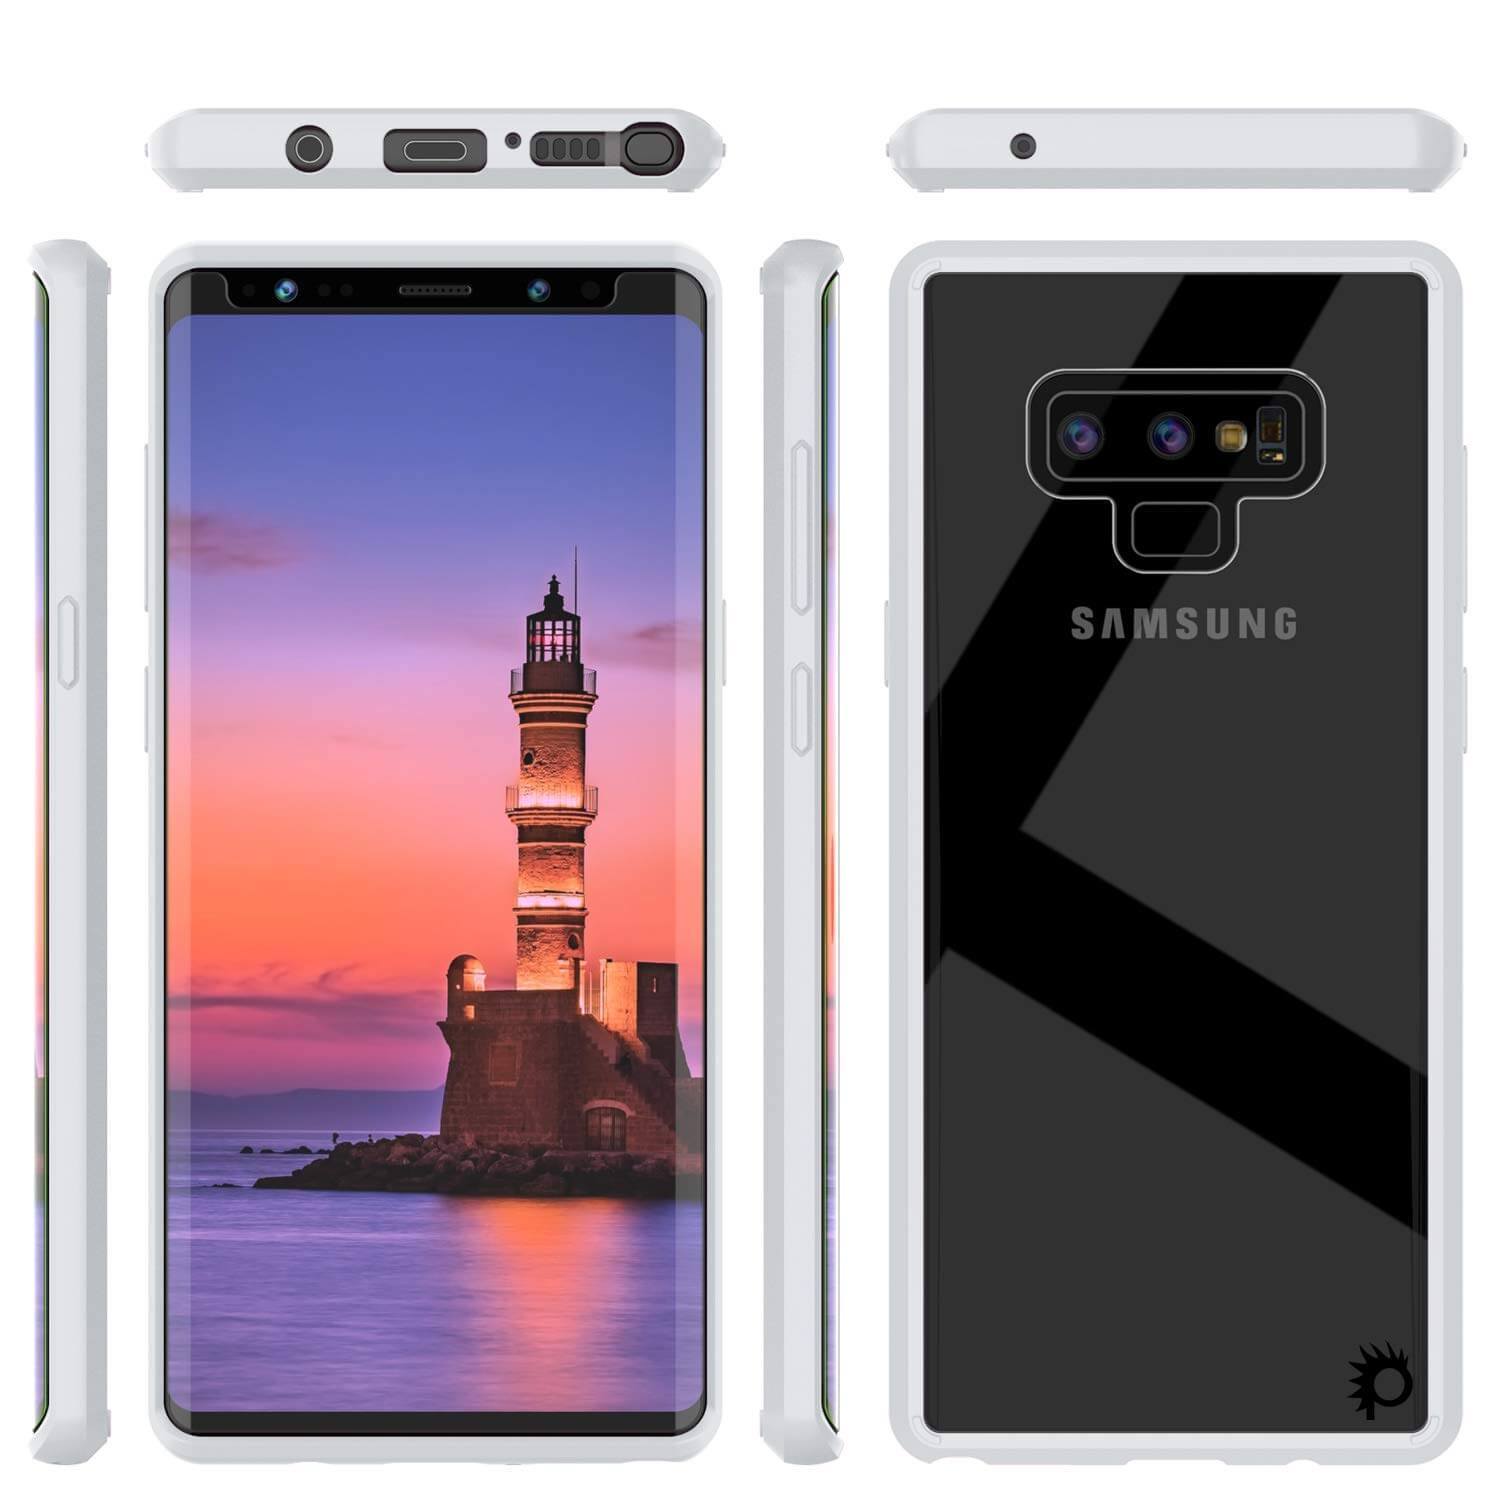 Galaxy Note 9 Case, PUNKcase [LUCID 2.0 Series] [Slim Fit] Armor Cover W/Integrated Anti-Shock System [White]